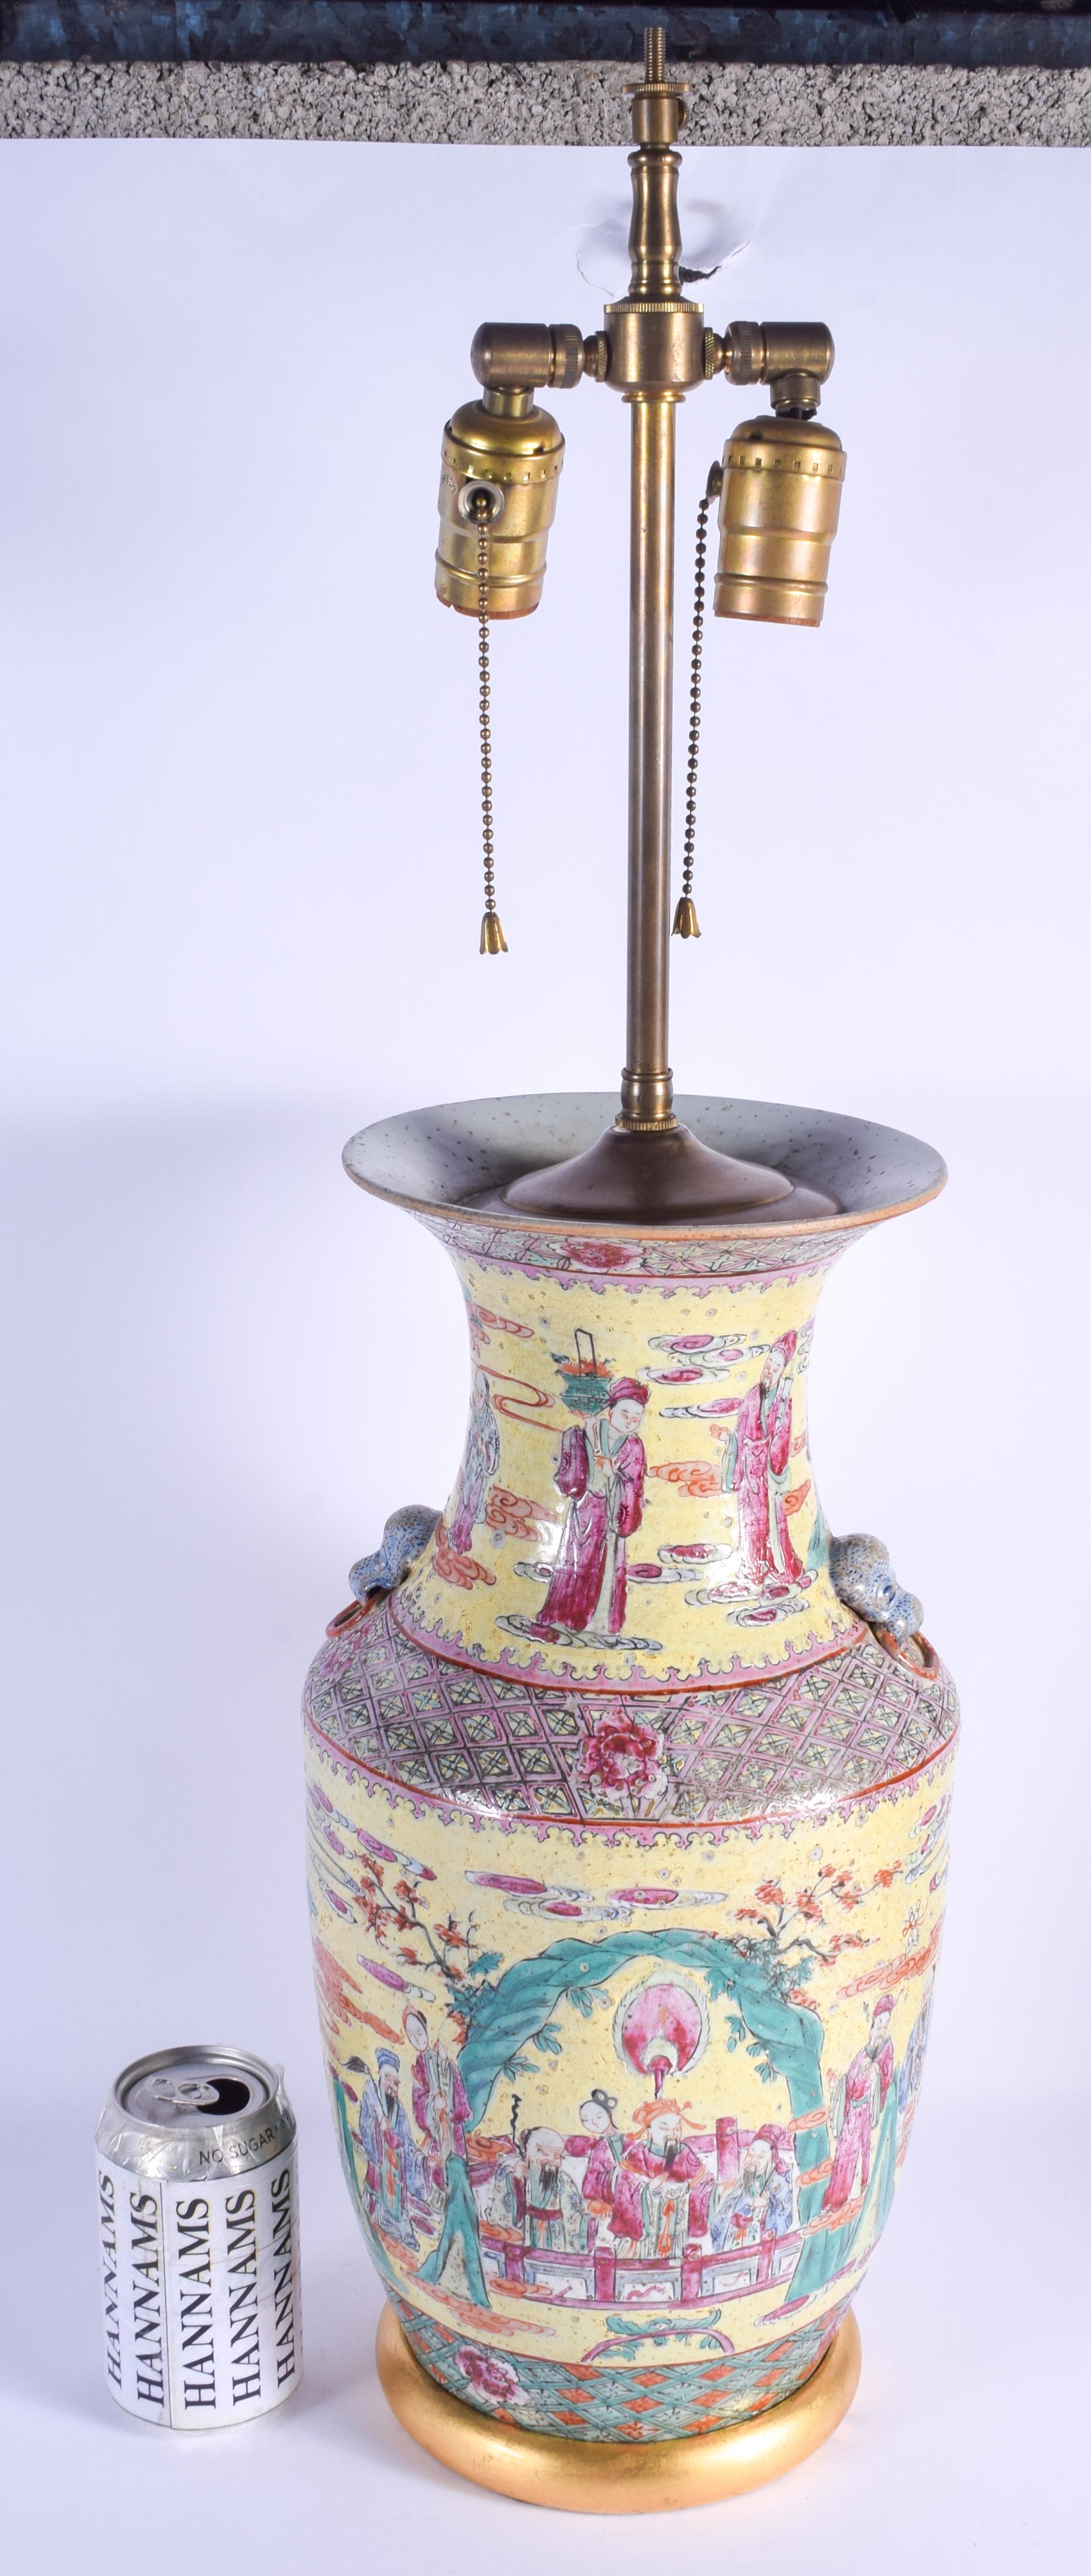 A LARGE EARLY 20TH CENTURY CHINESE FAMILLE ROSE VASE converted to a lamp. Vase 37 cm high.